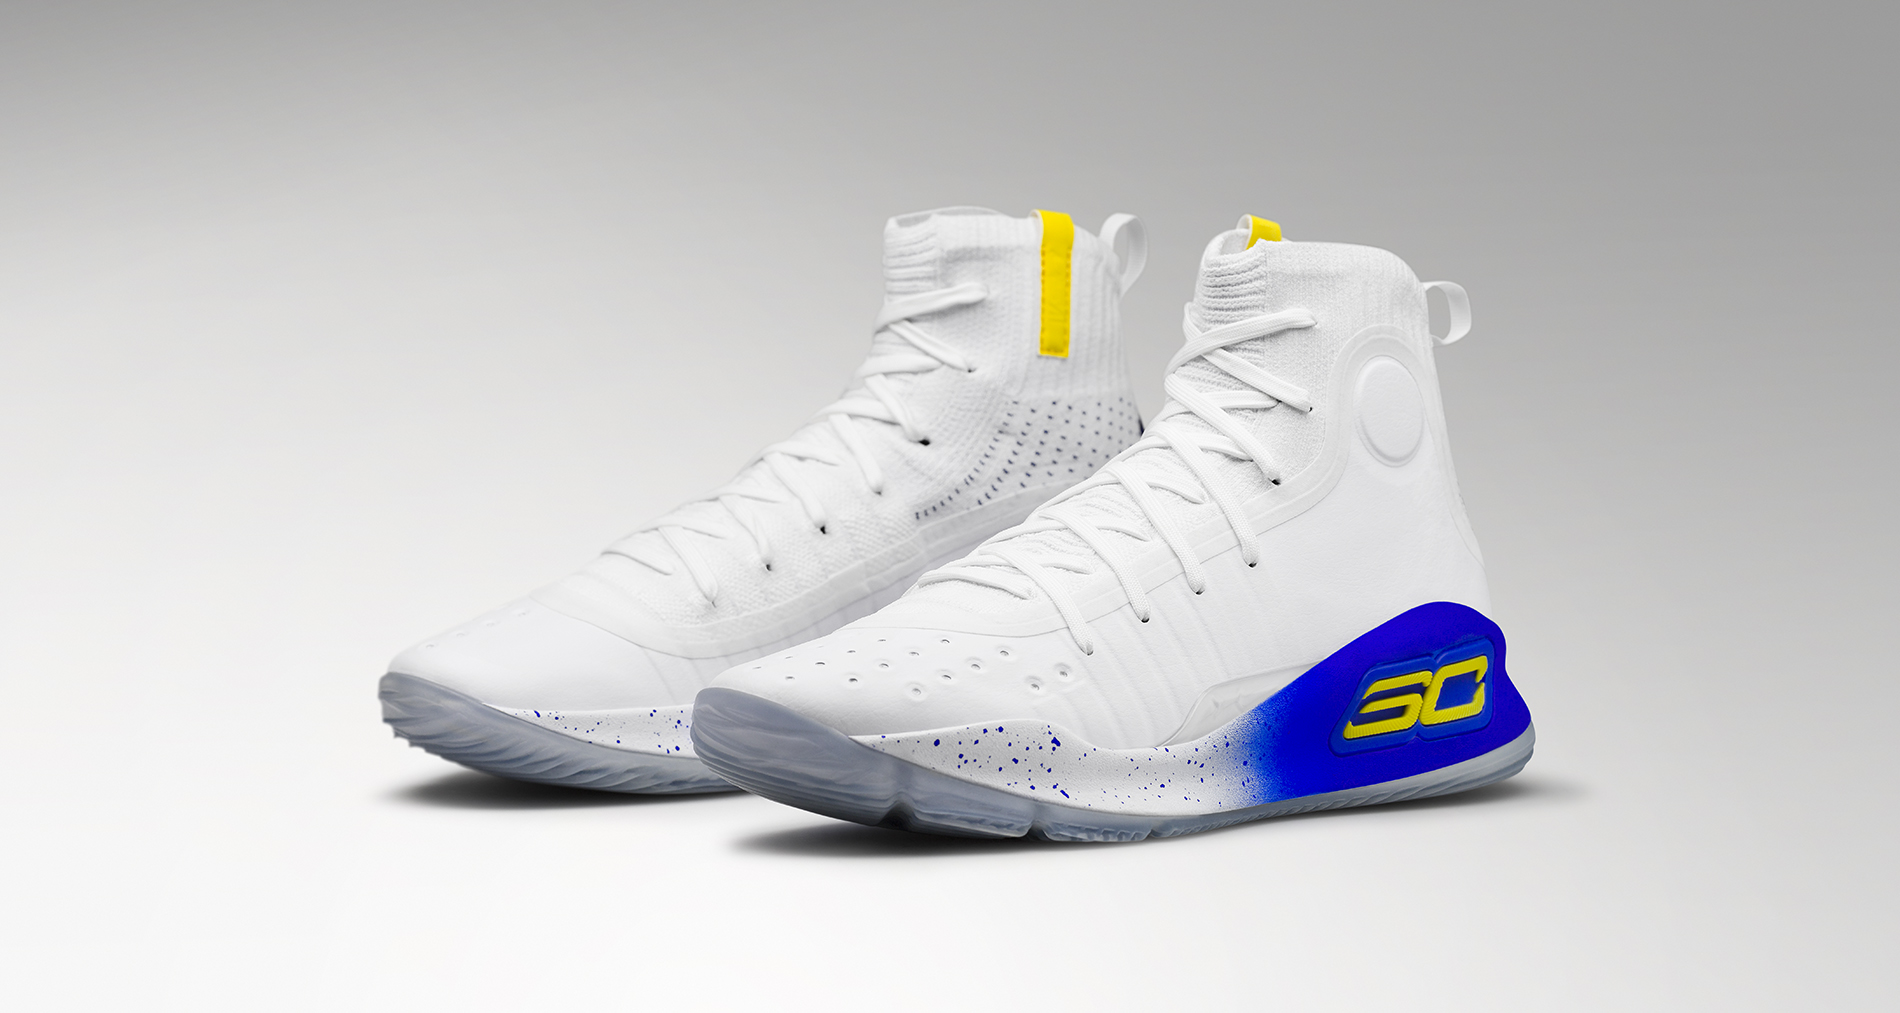 Under Armour Curry 4 "More Dubs"